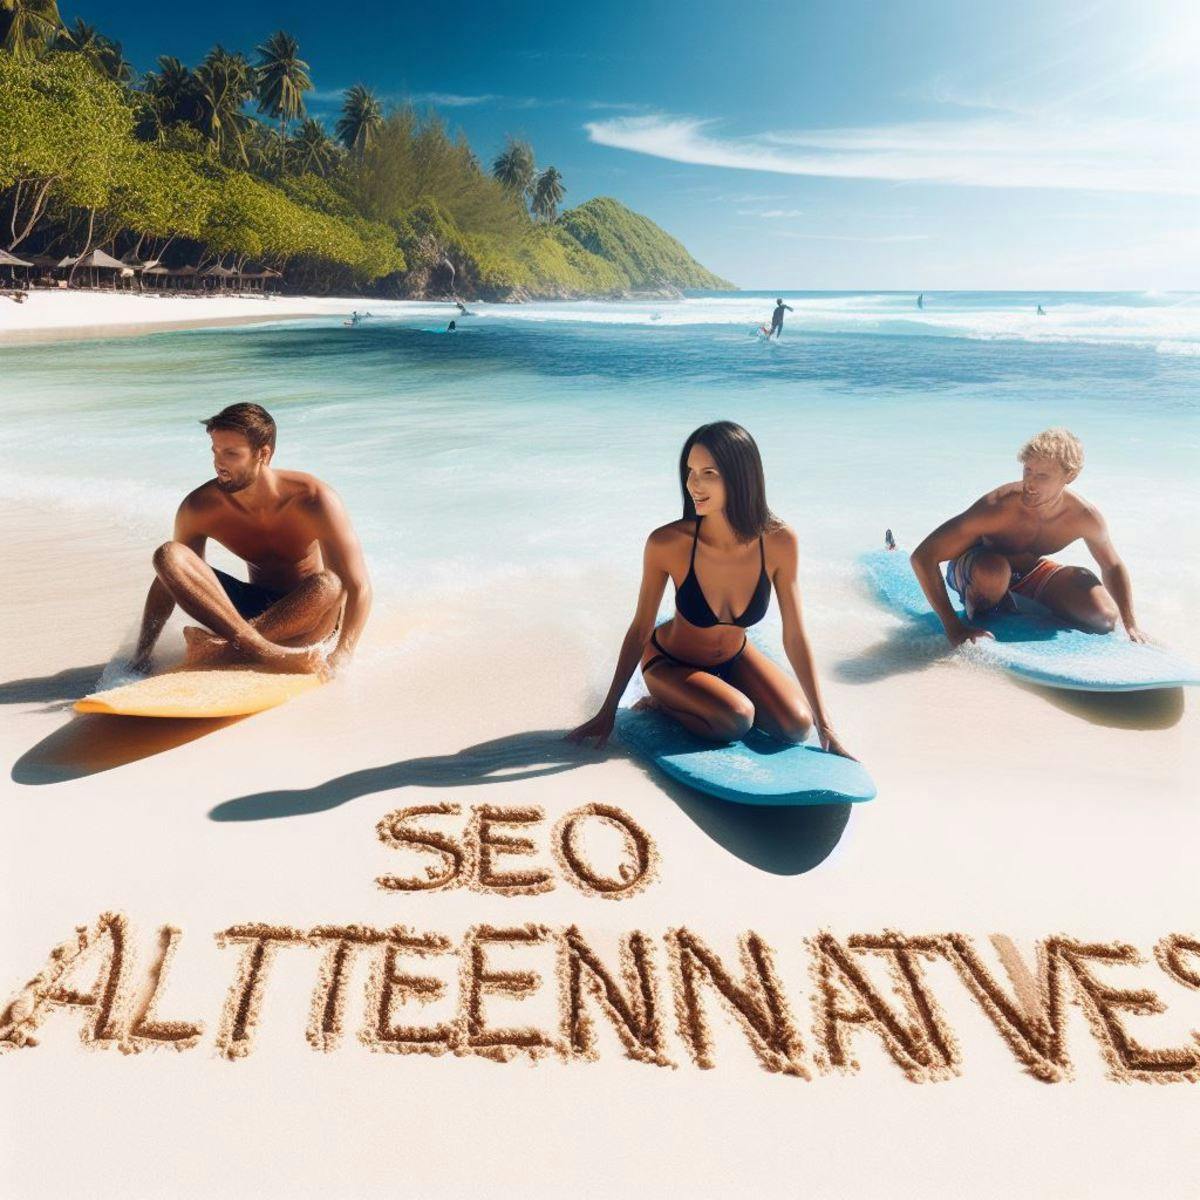 Surfer - SEO Audit Tool for On-Page and Content